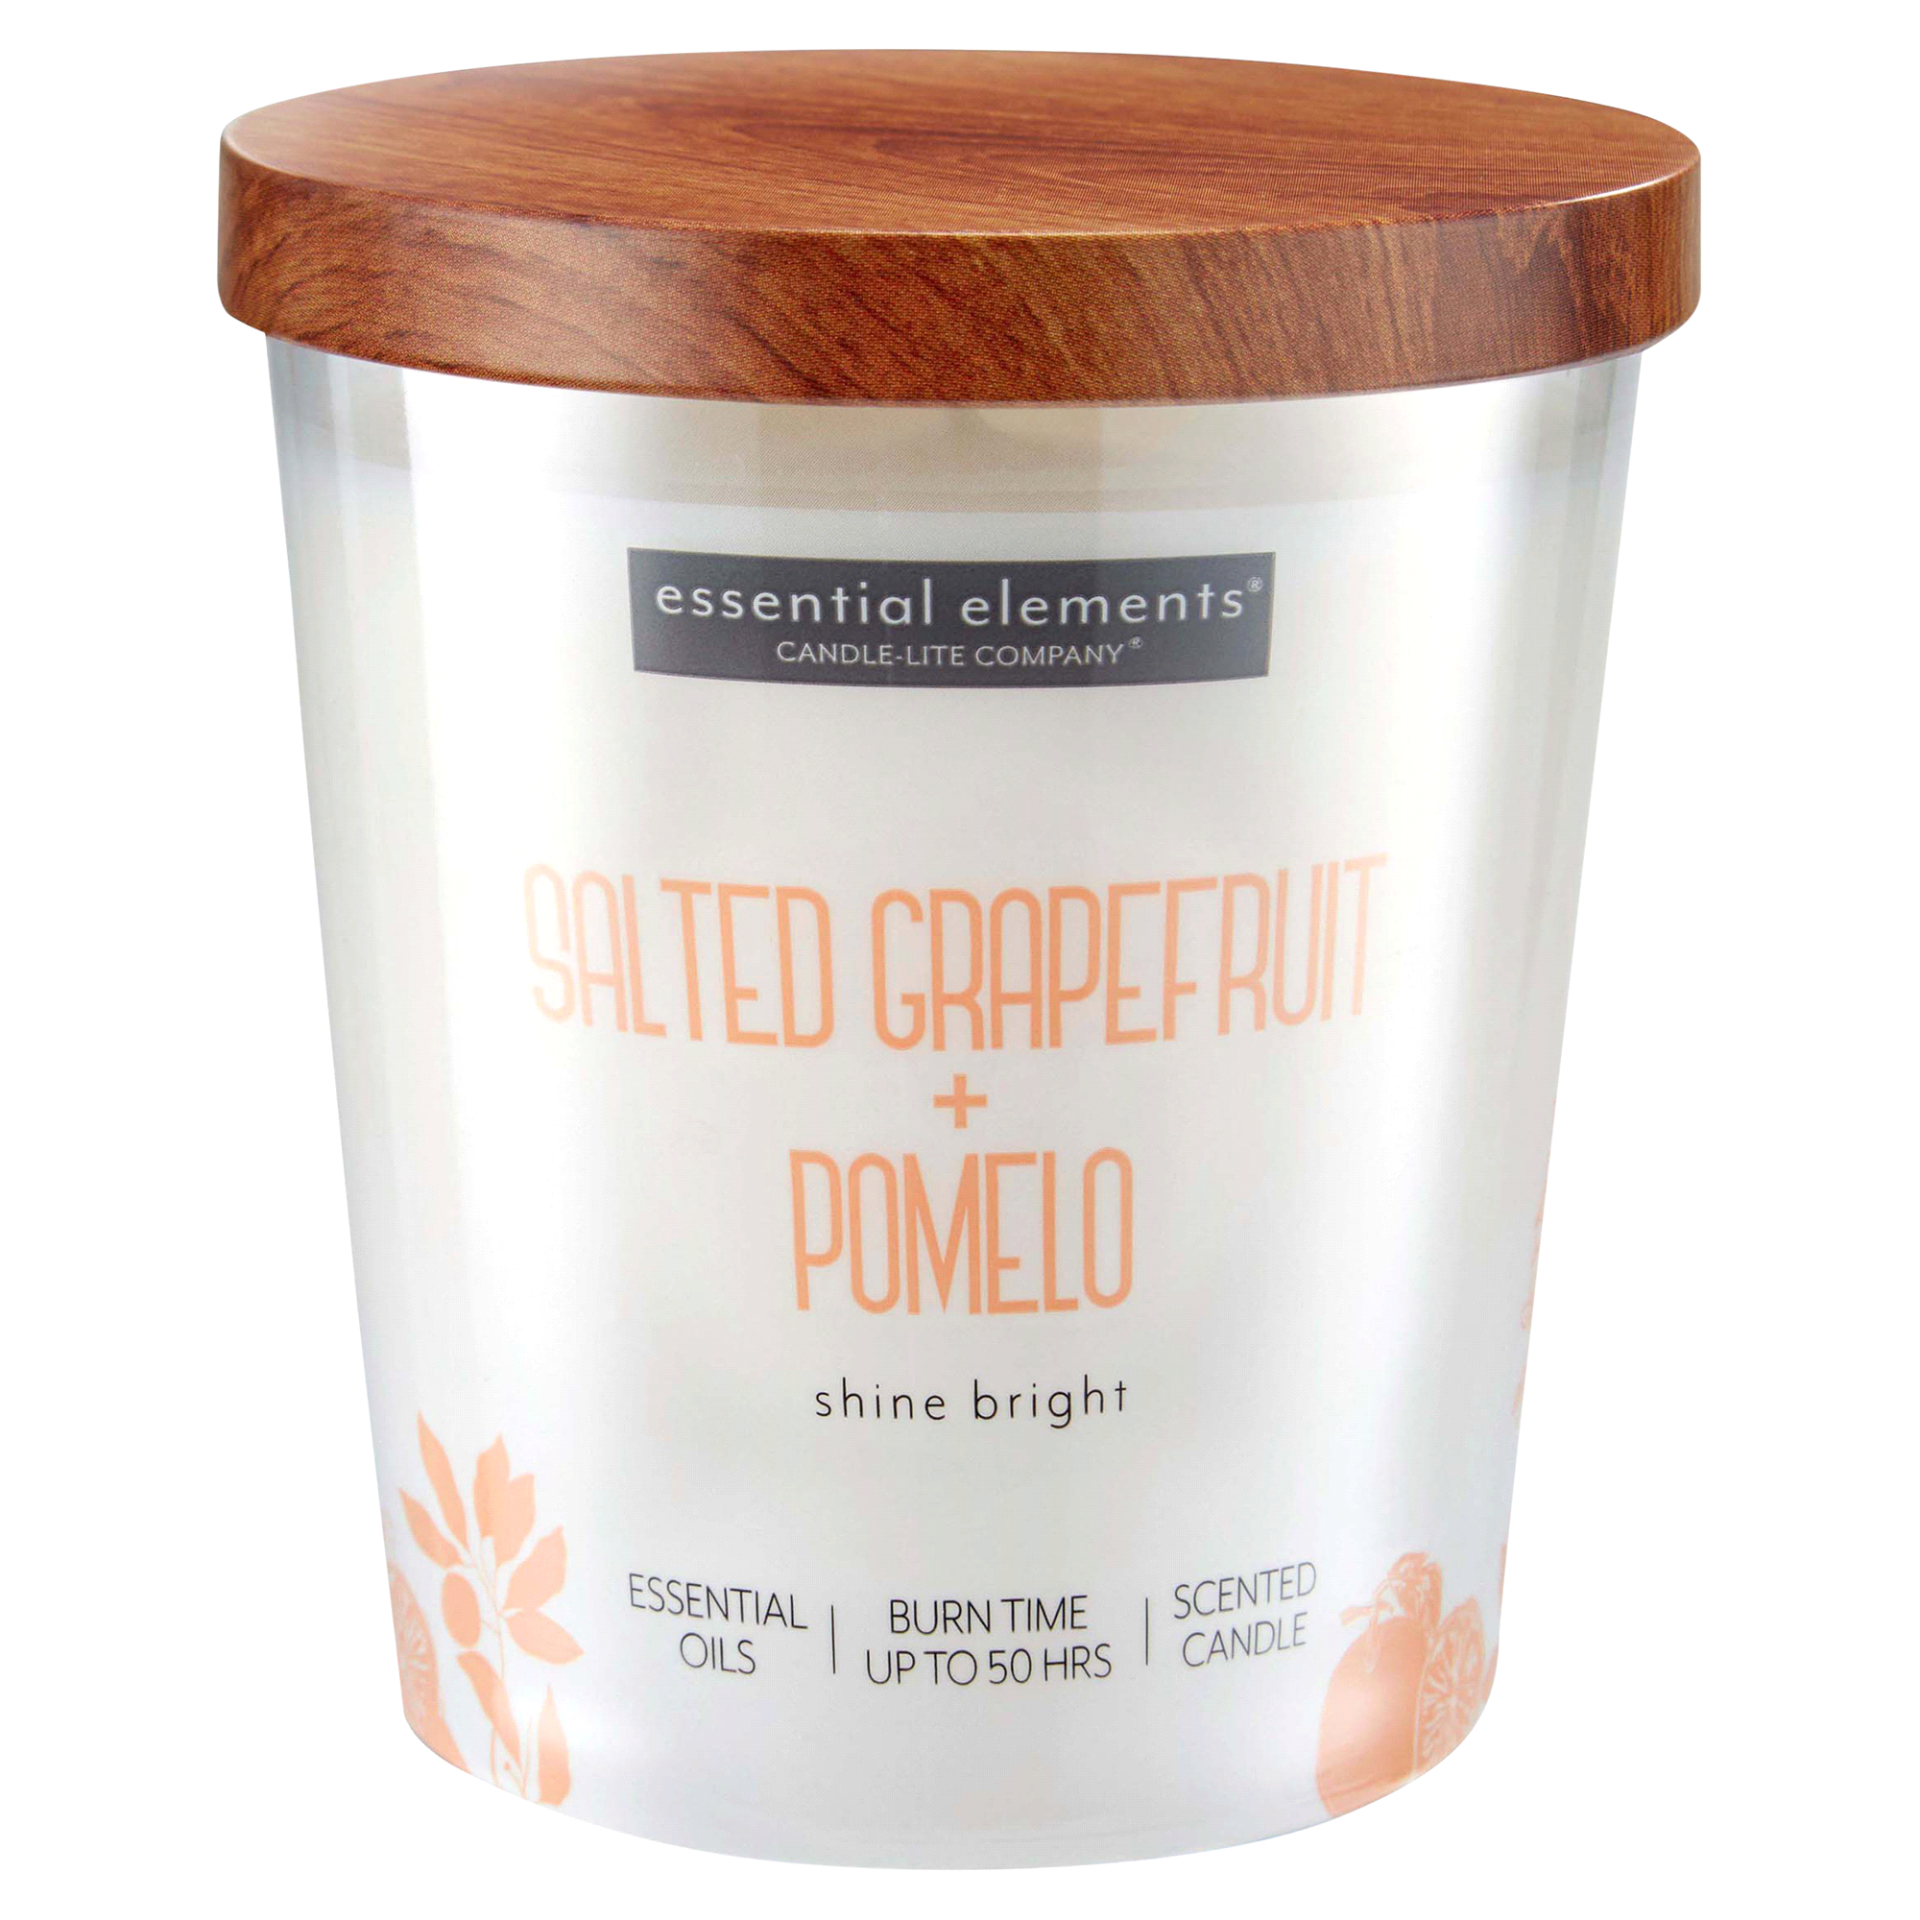 slide 1 of 1, Candle-Lite Scented Candle - Salted Grapefruit & Pomelo, 9 oz